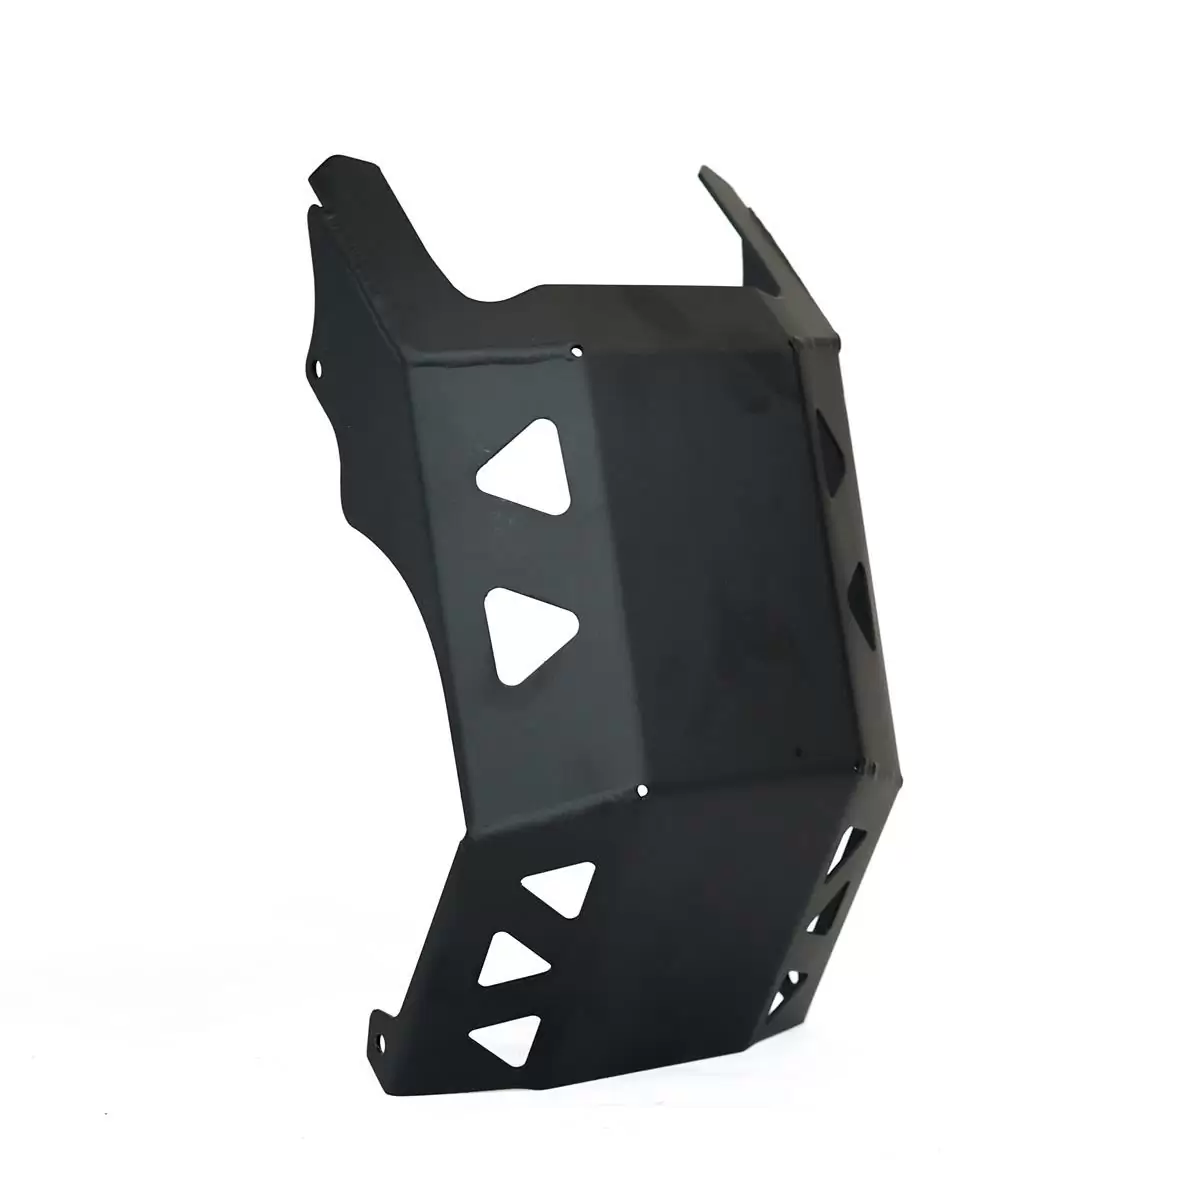 Engine Guard In Black Aluminum For Sting TL3000 MX And Sting L1e Trail And Enduro - image